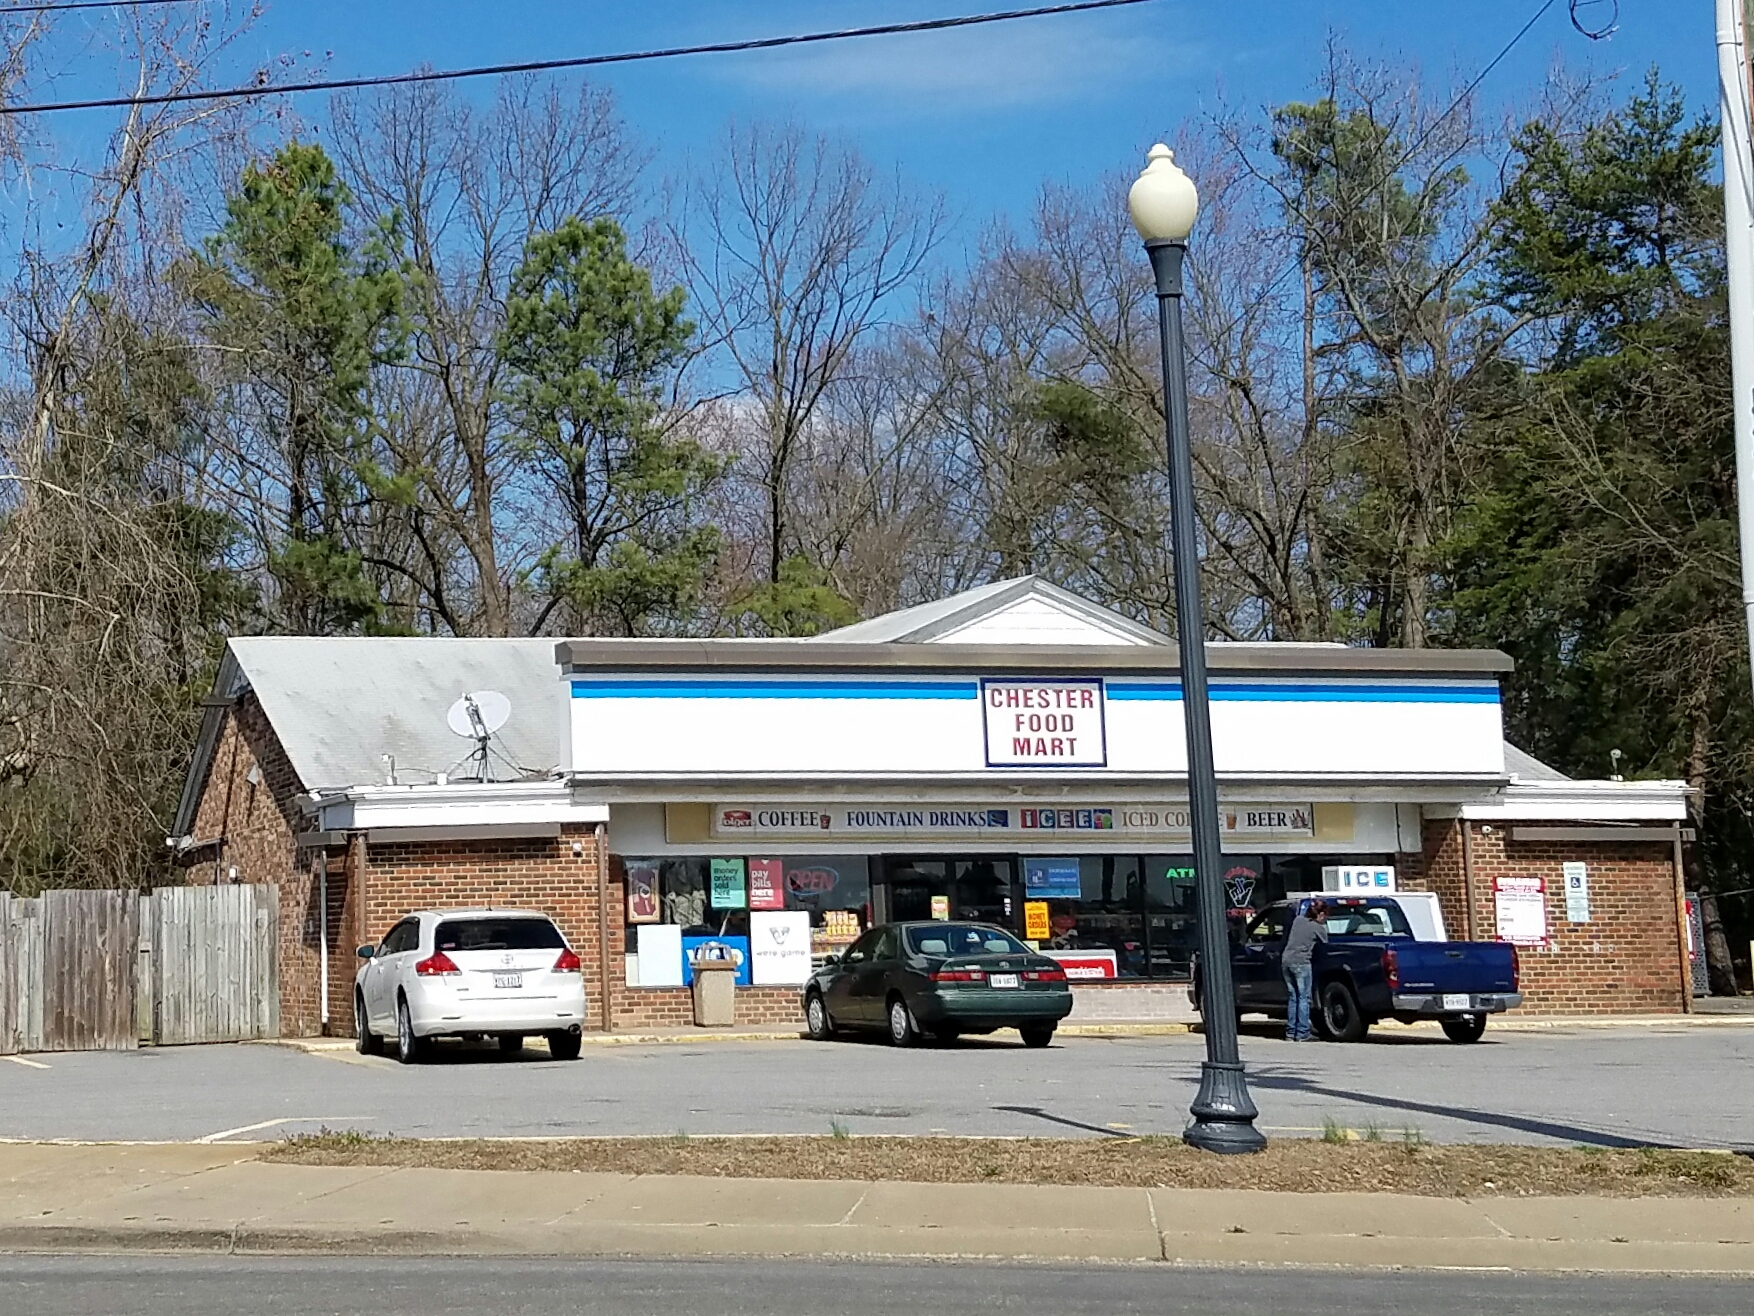 Chester Food Mart